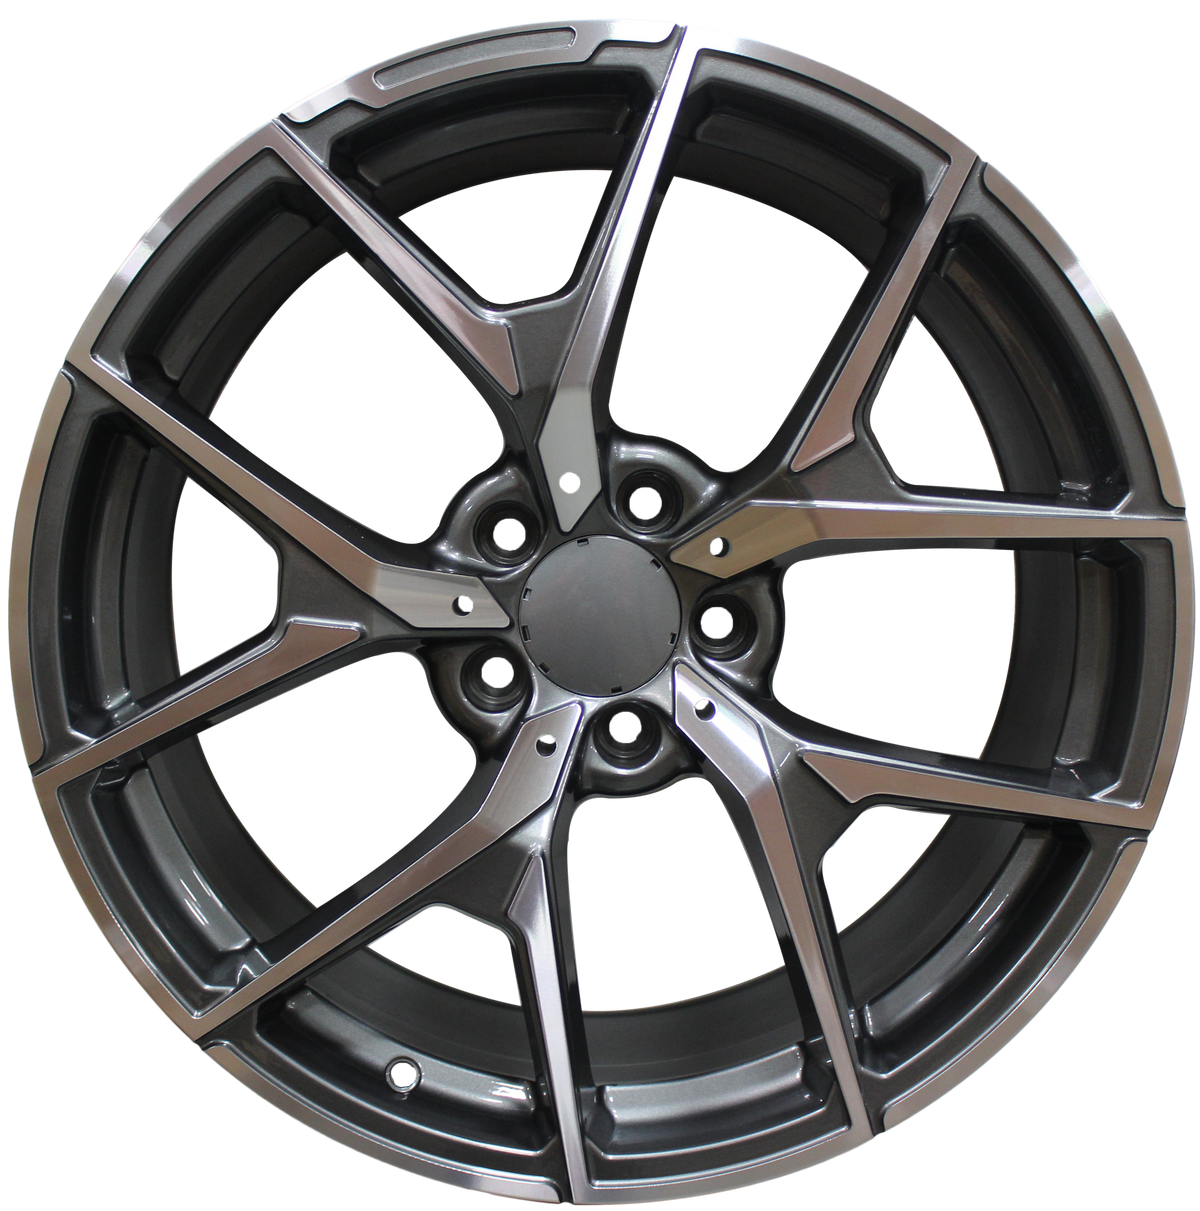 20 Inch Mercedes Staggered Wheels Fit E Class S Class AMG Models